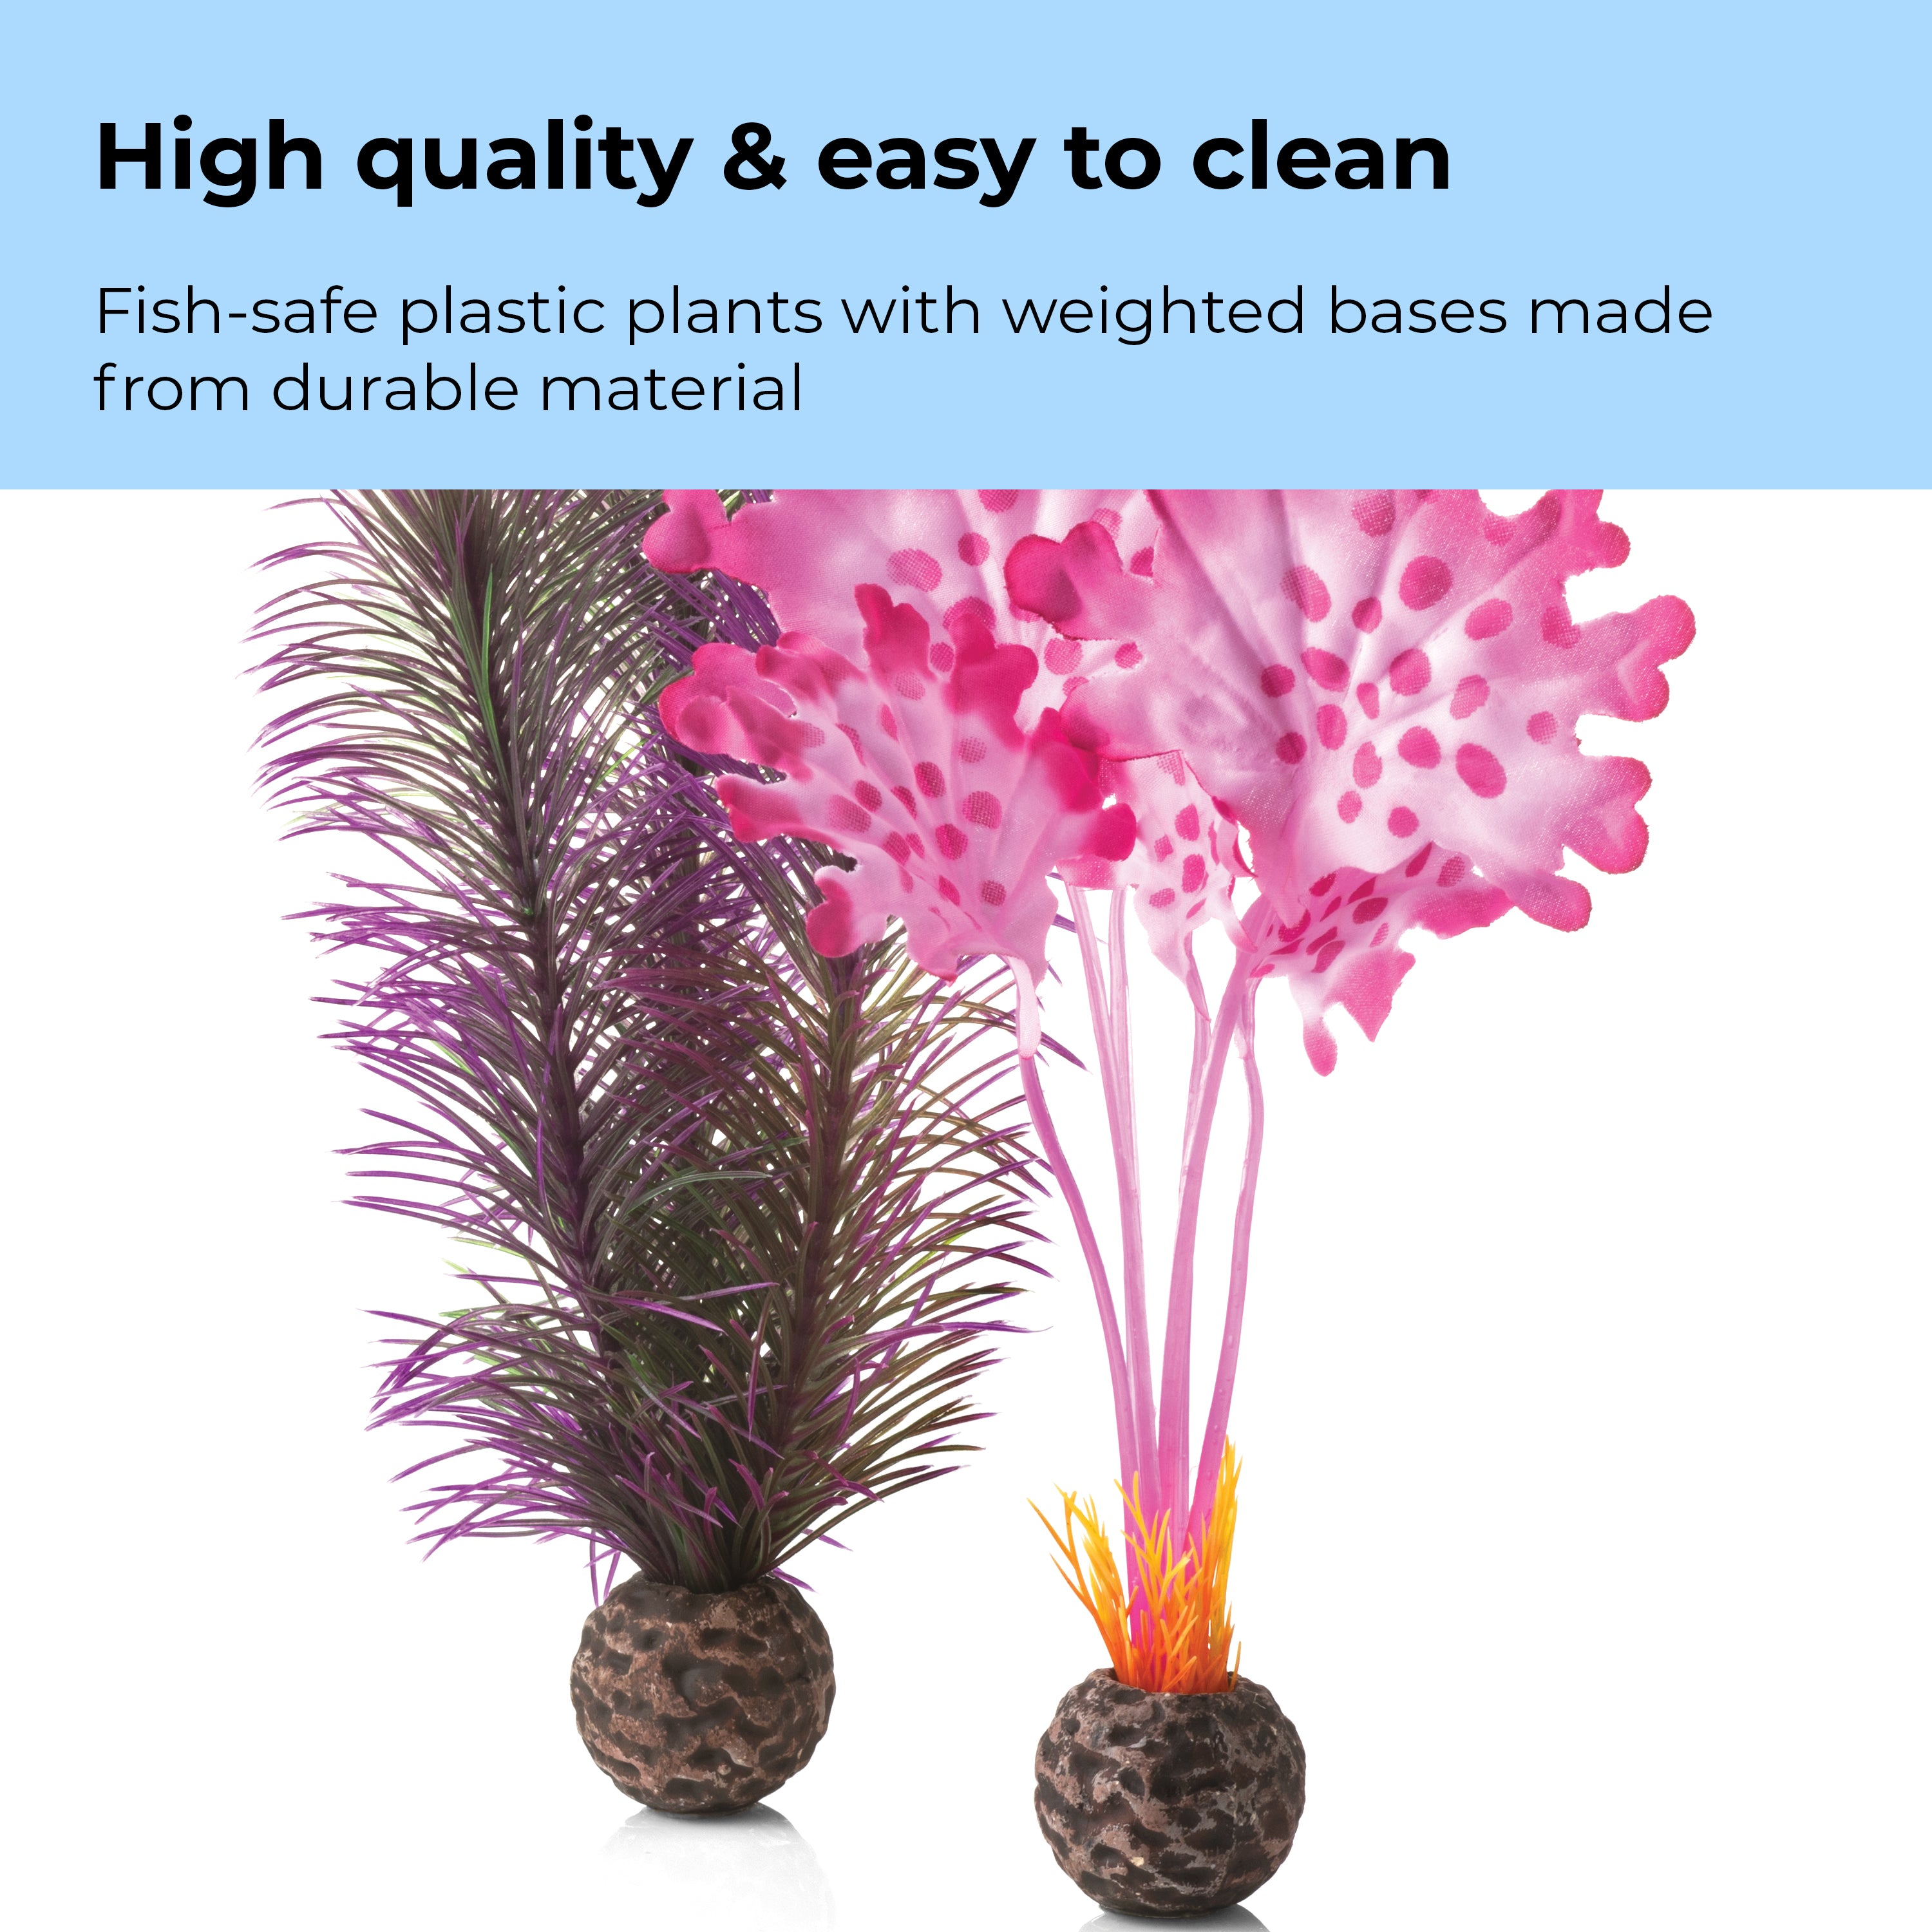 Small Kelp Plant Set - High quality & easy to clean